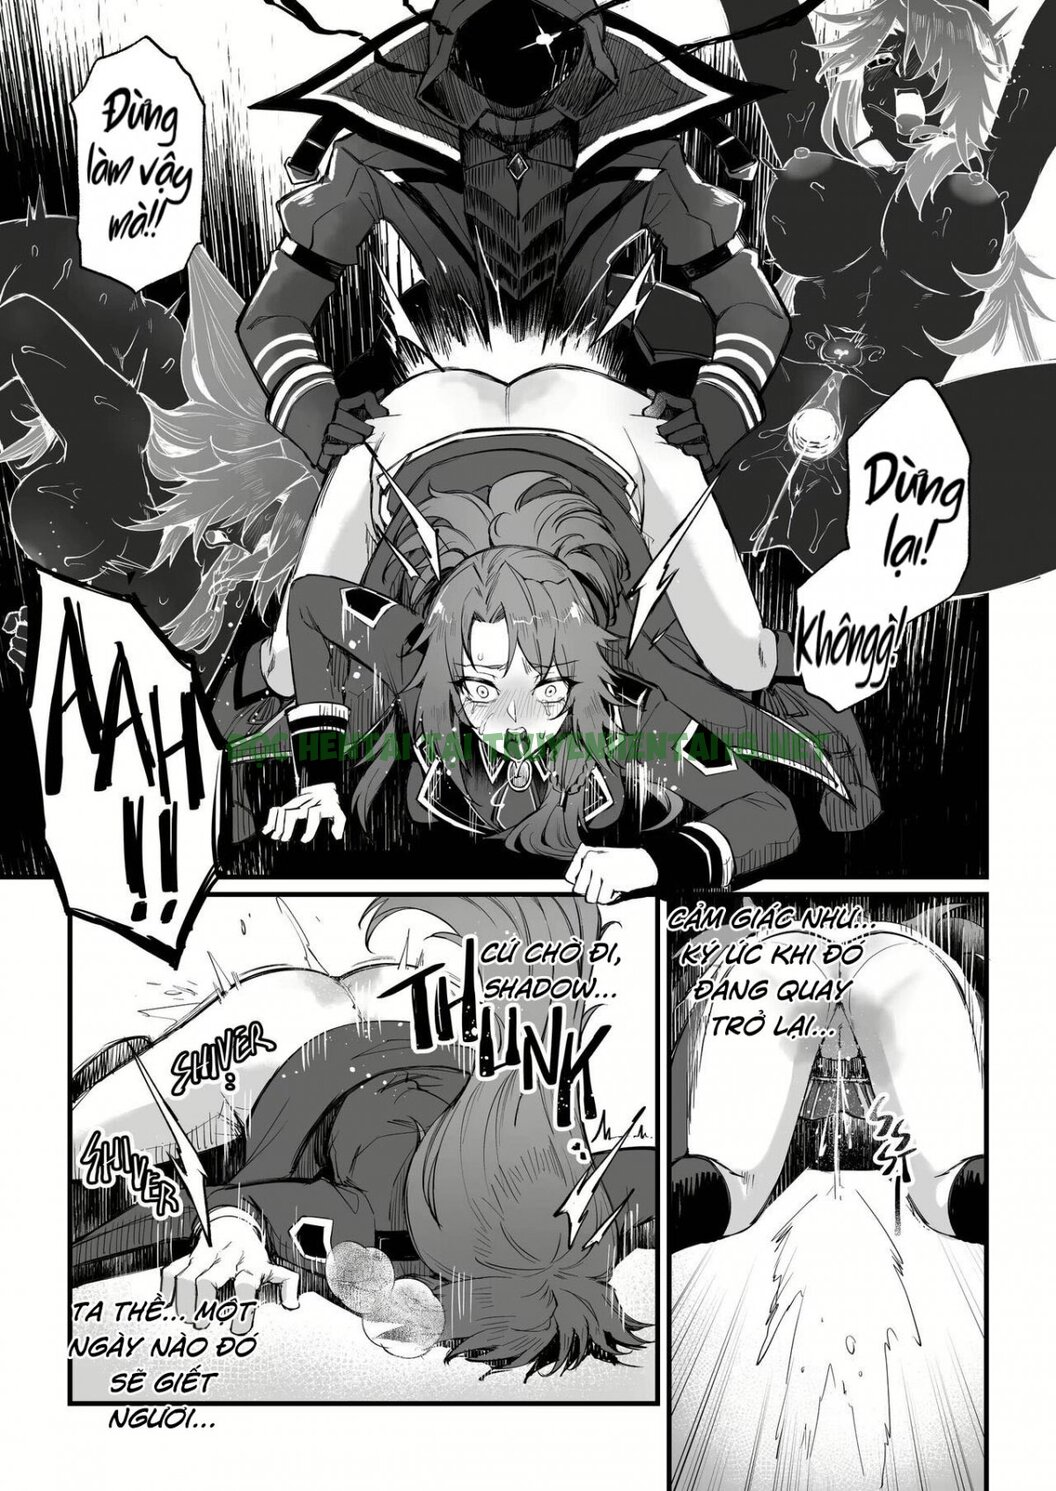 Xem ảnh I NEED MORE POWER! - Chapter 1.5 END - 13 - Hentai24h.Tv